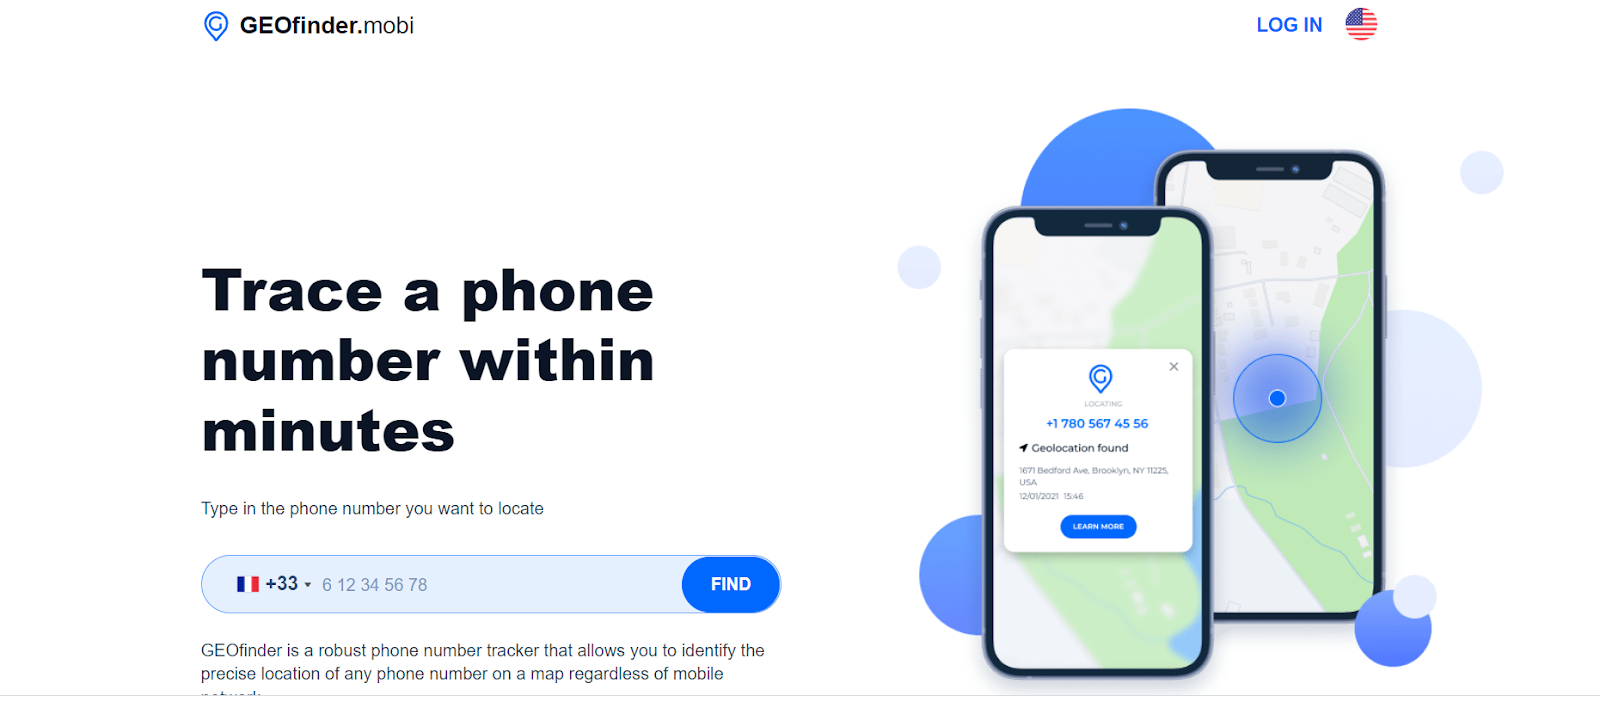 GeoFinder app enables tracking a cell phone location by phone number